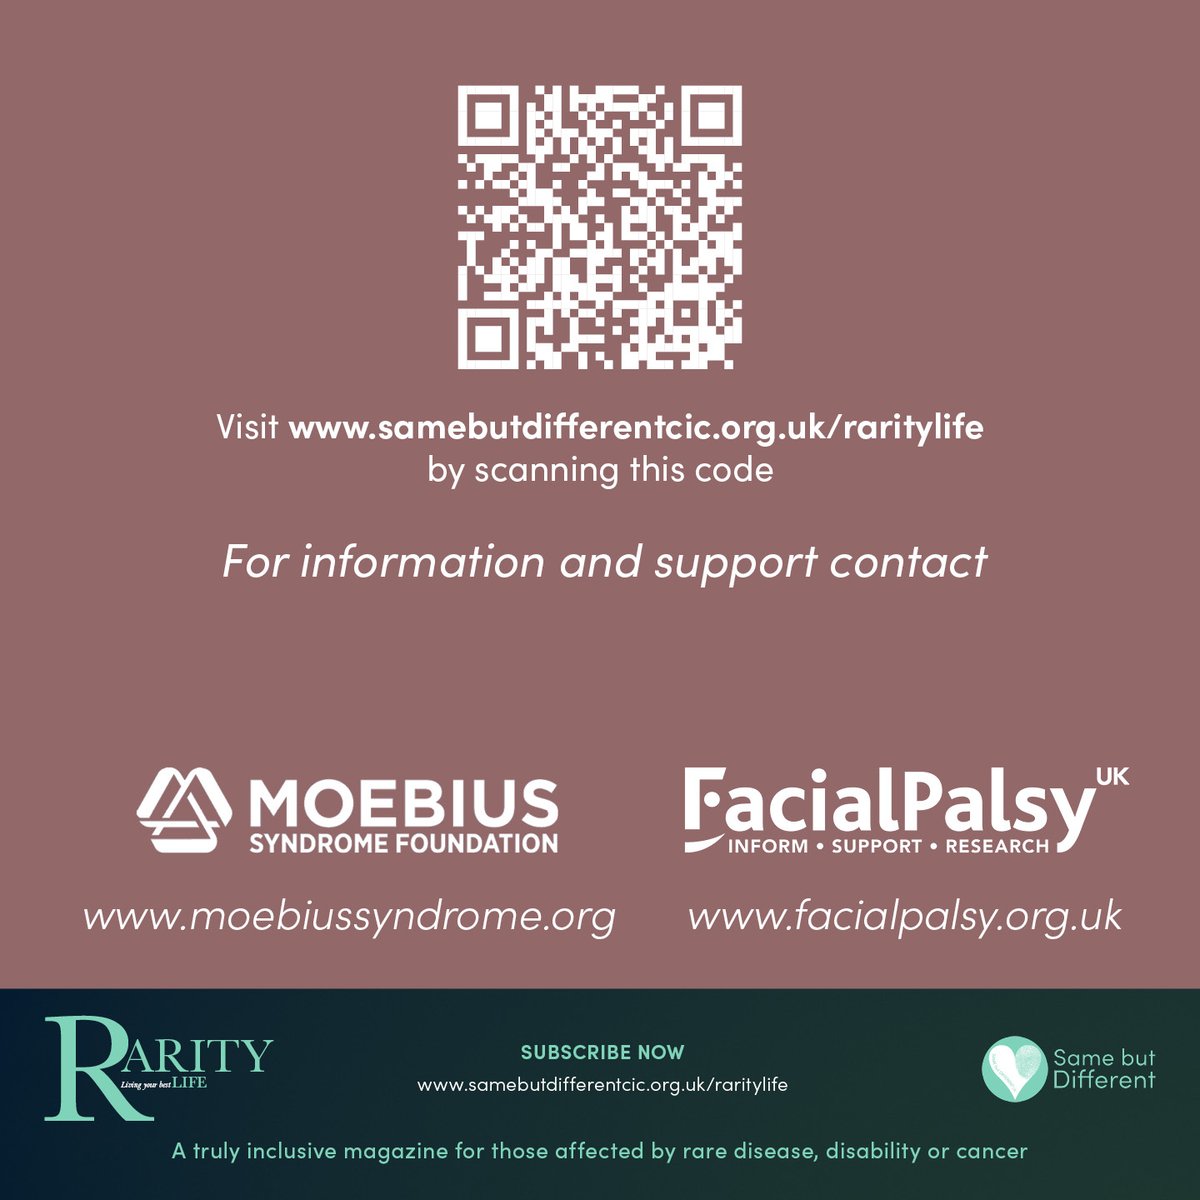 Katja has Moebius syndrome that causes facial paralysis but she's not let it hold her back. Her story's in #RarityLife samebutdifferentcic.org.uk/raritylife #moebiussyndrome #facialpalsy #FPAW2024 #UniqueSmiles #facialpalsysupport #facialparalysissupport #fashion #nationallottery #Disability